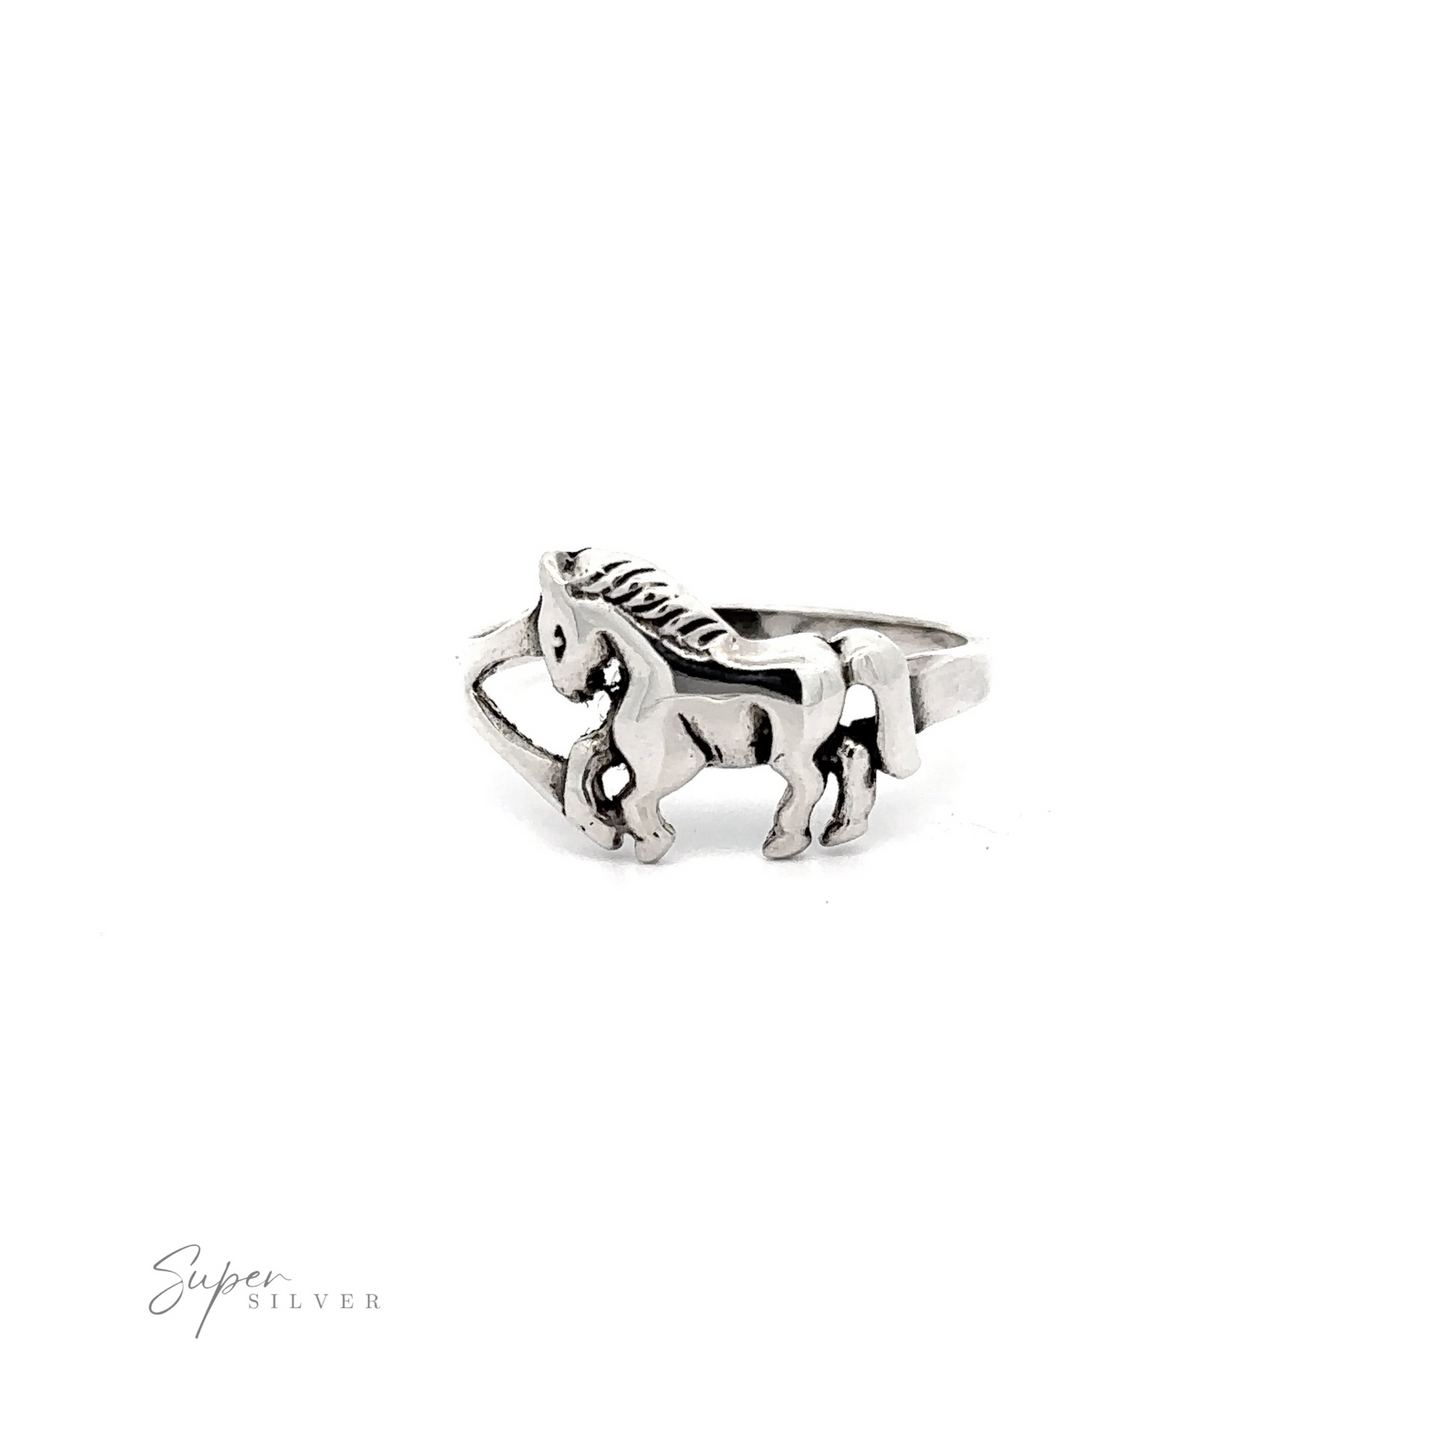 An elegant Sterling Silver Horse Ring perfect for any equestrian lover.